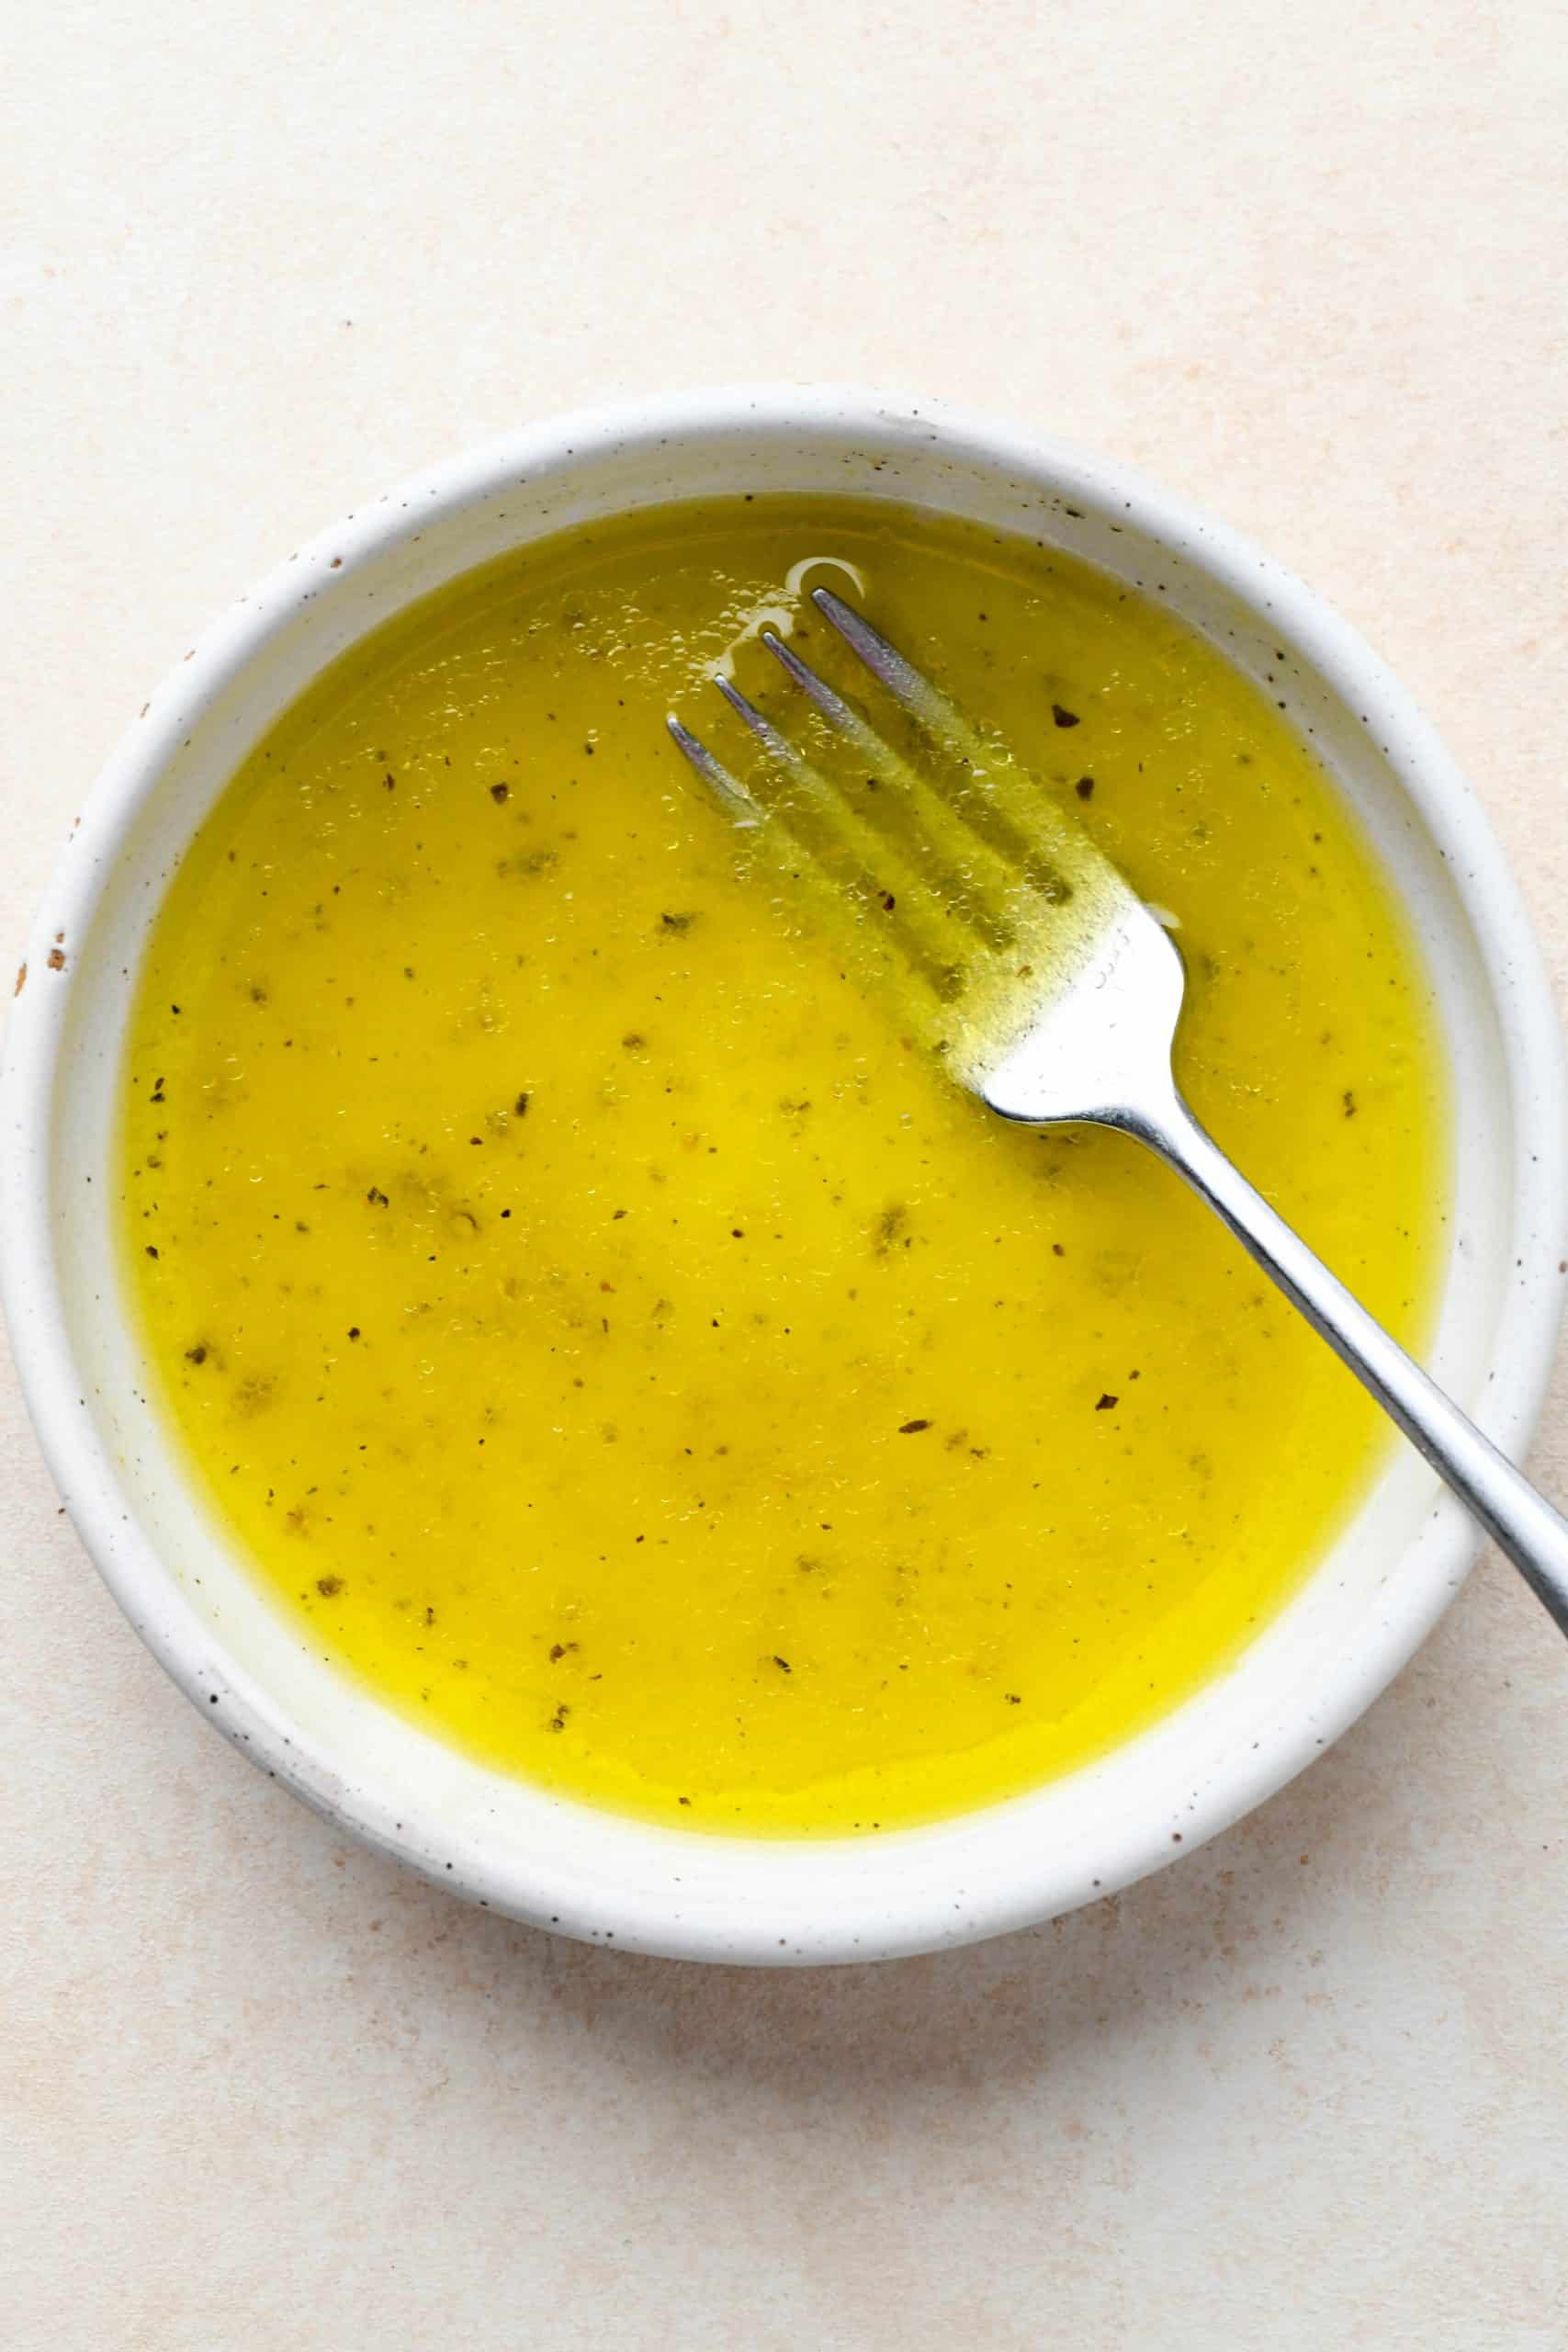 How to make Simple Arugula Salad: Salad dressing ingredients in a small bowl after mixing.